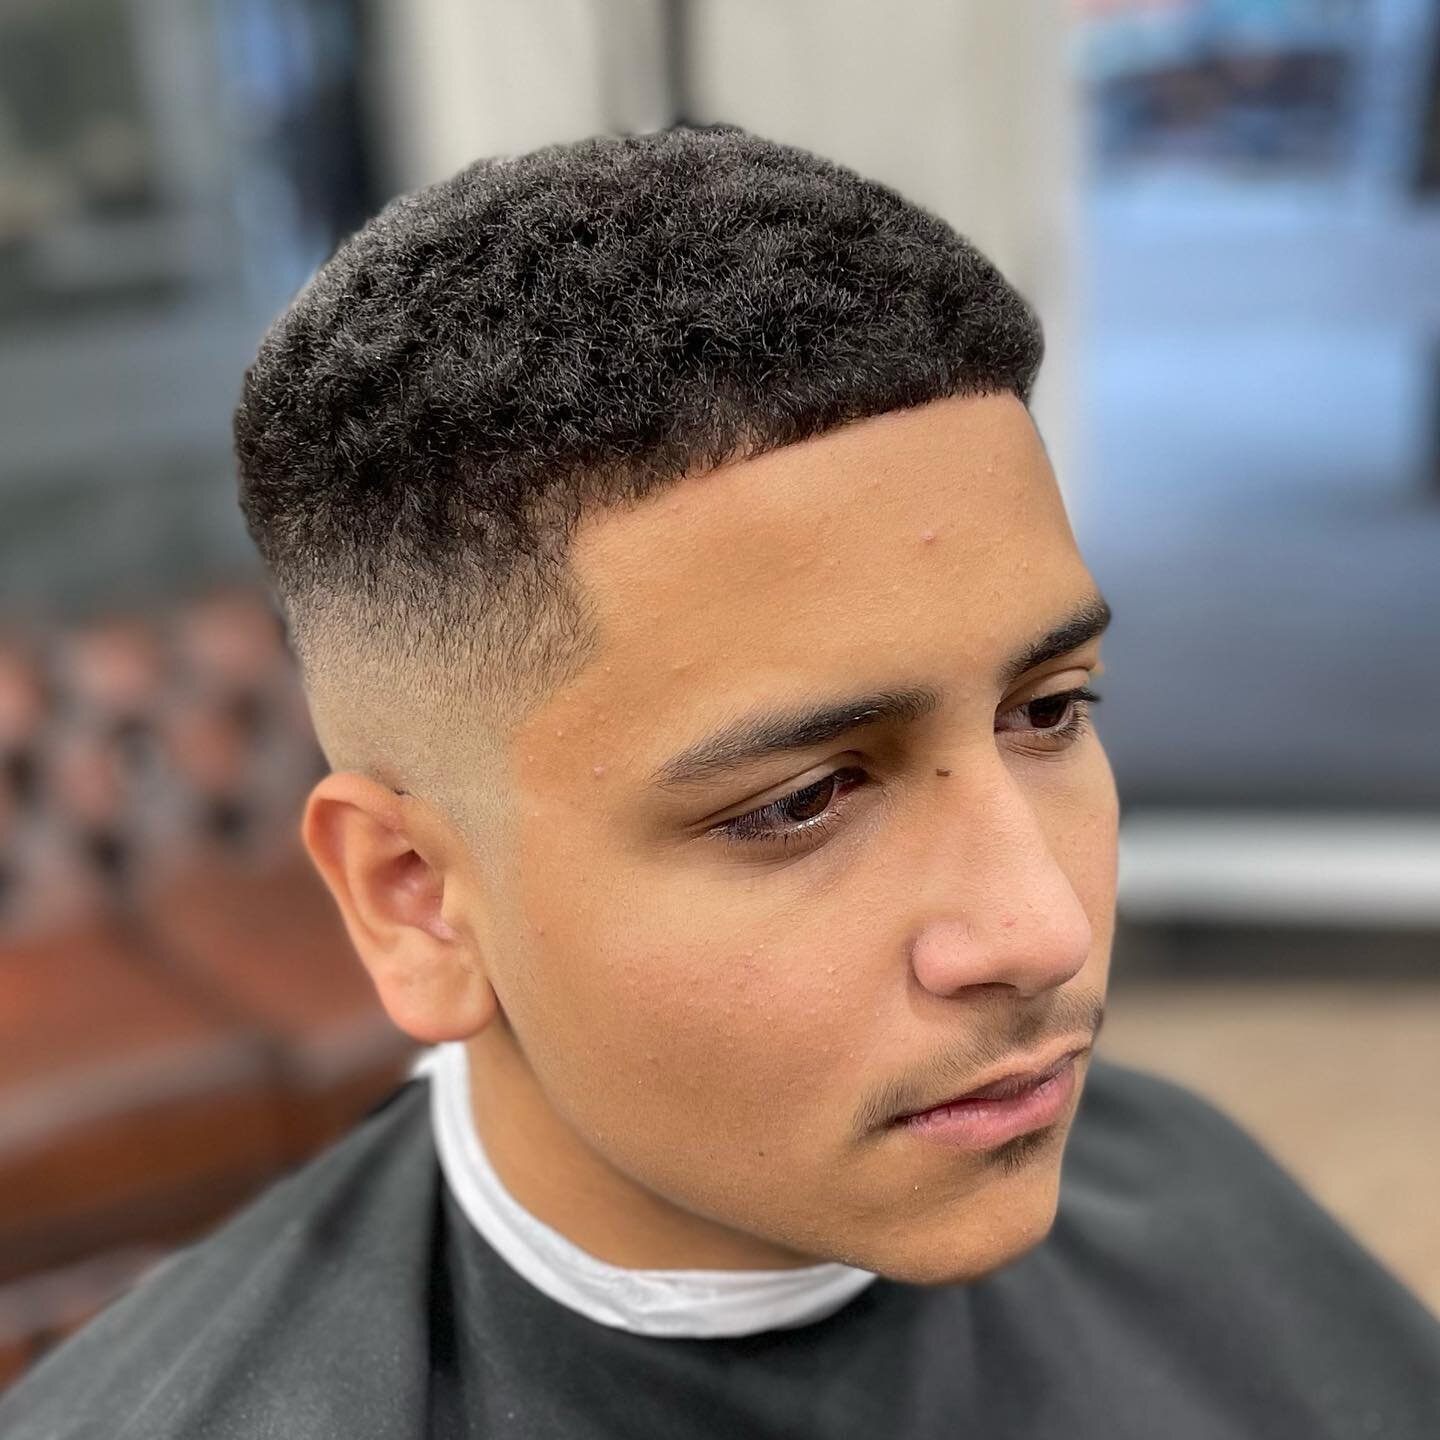 Have you ever left a barber feeling disappointed? We can guarantee that you&rsquo;ll never feel like that with us 🔥 

Come check us out - link in bio to book your next cut!